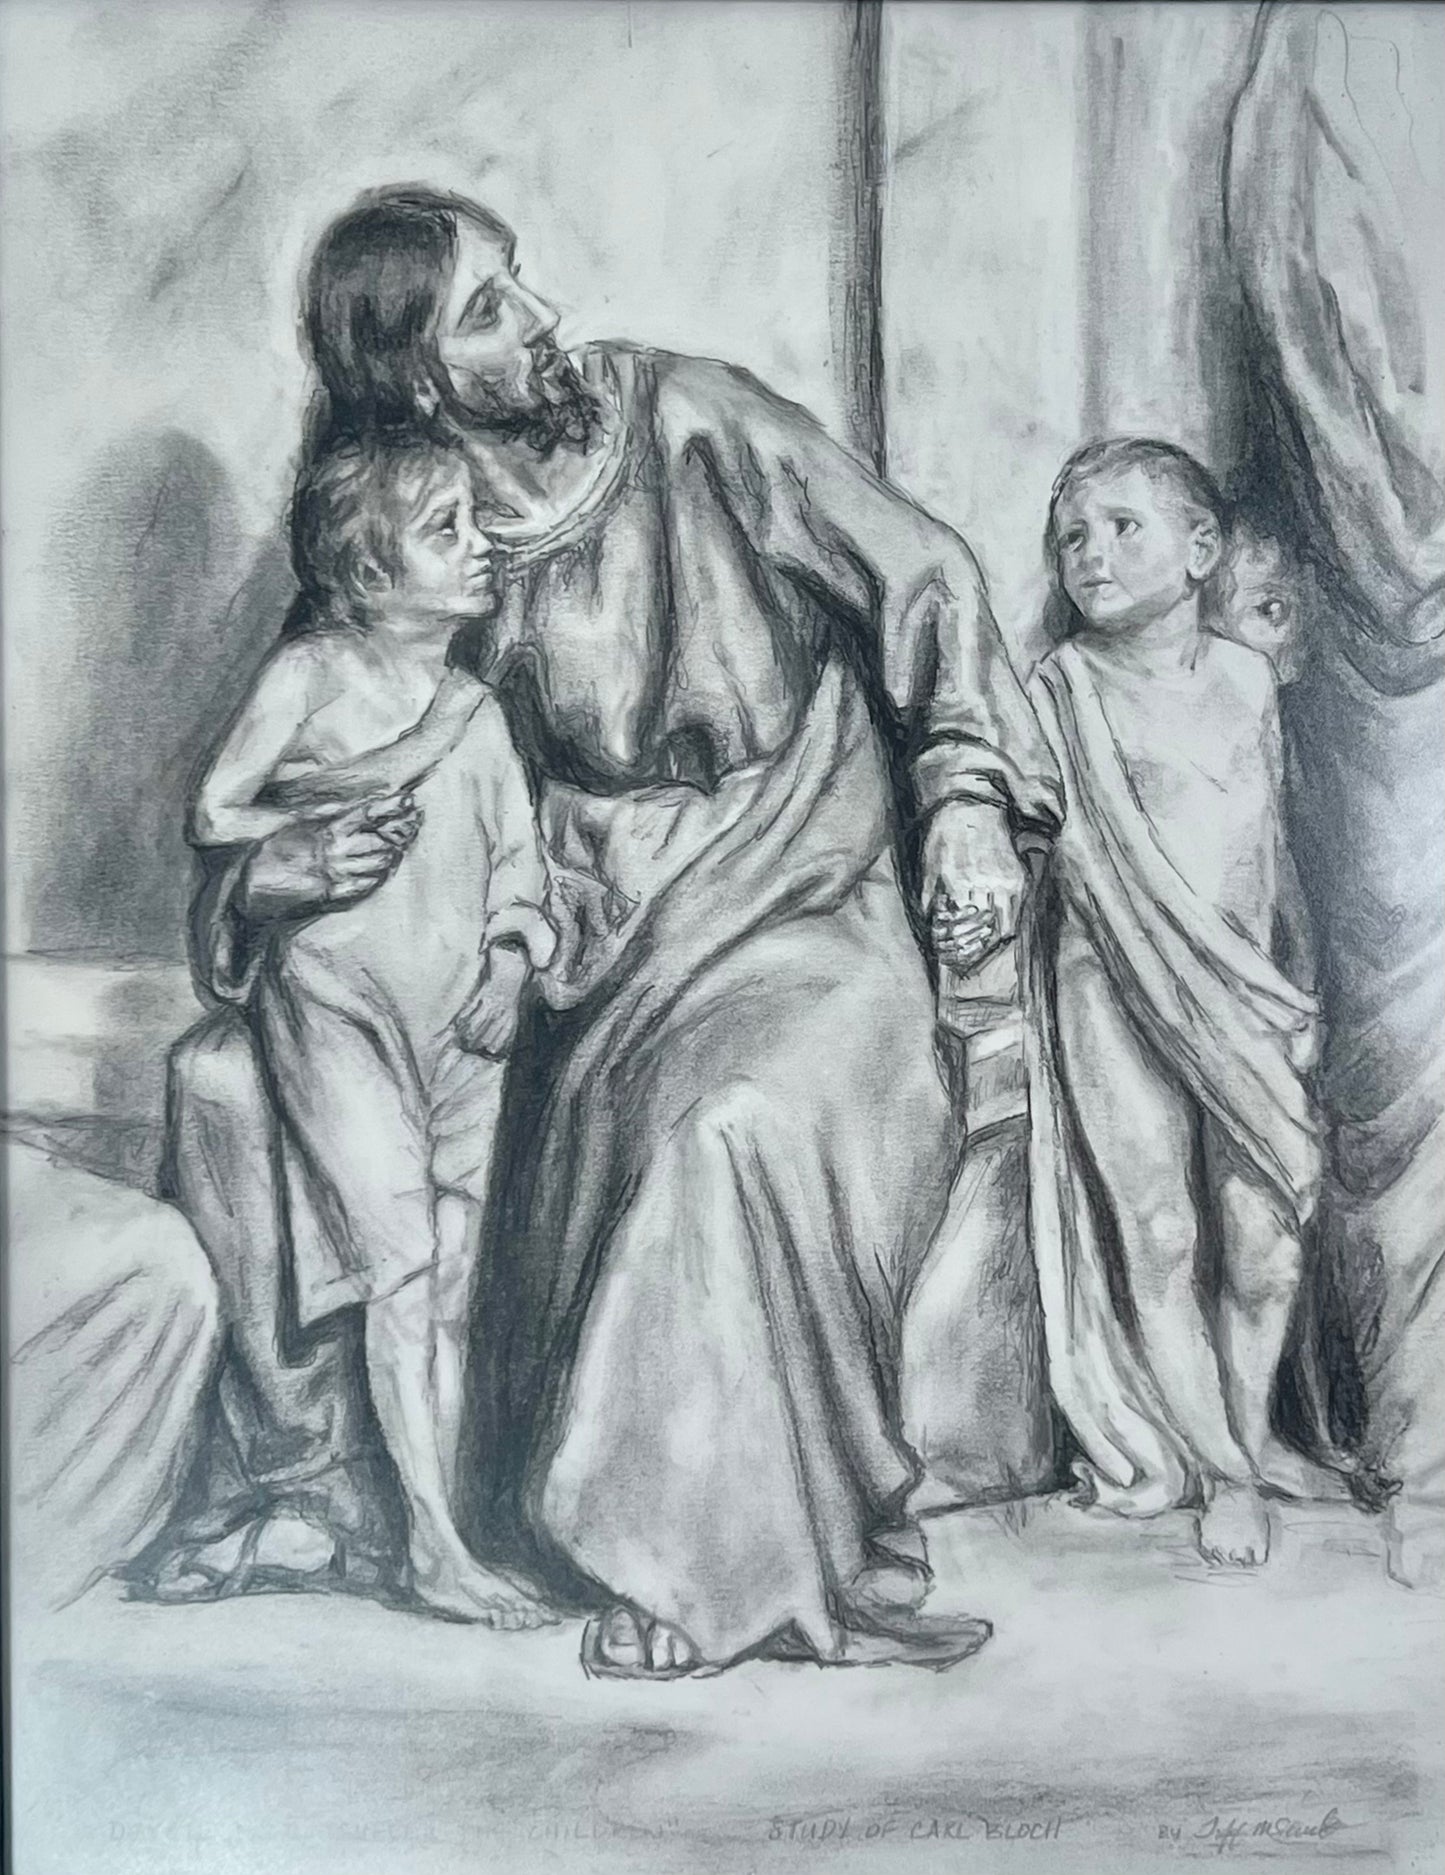 Detail from "Suffer the Children," 18x21 pencil sketch, a study of Carl Bloch